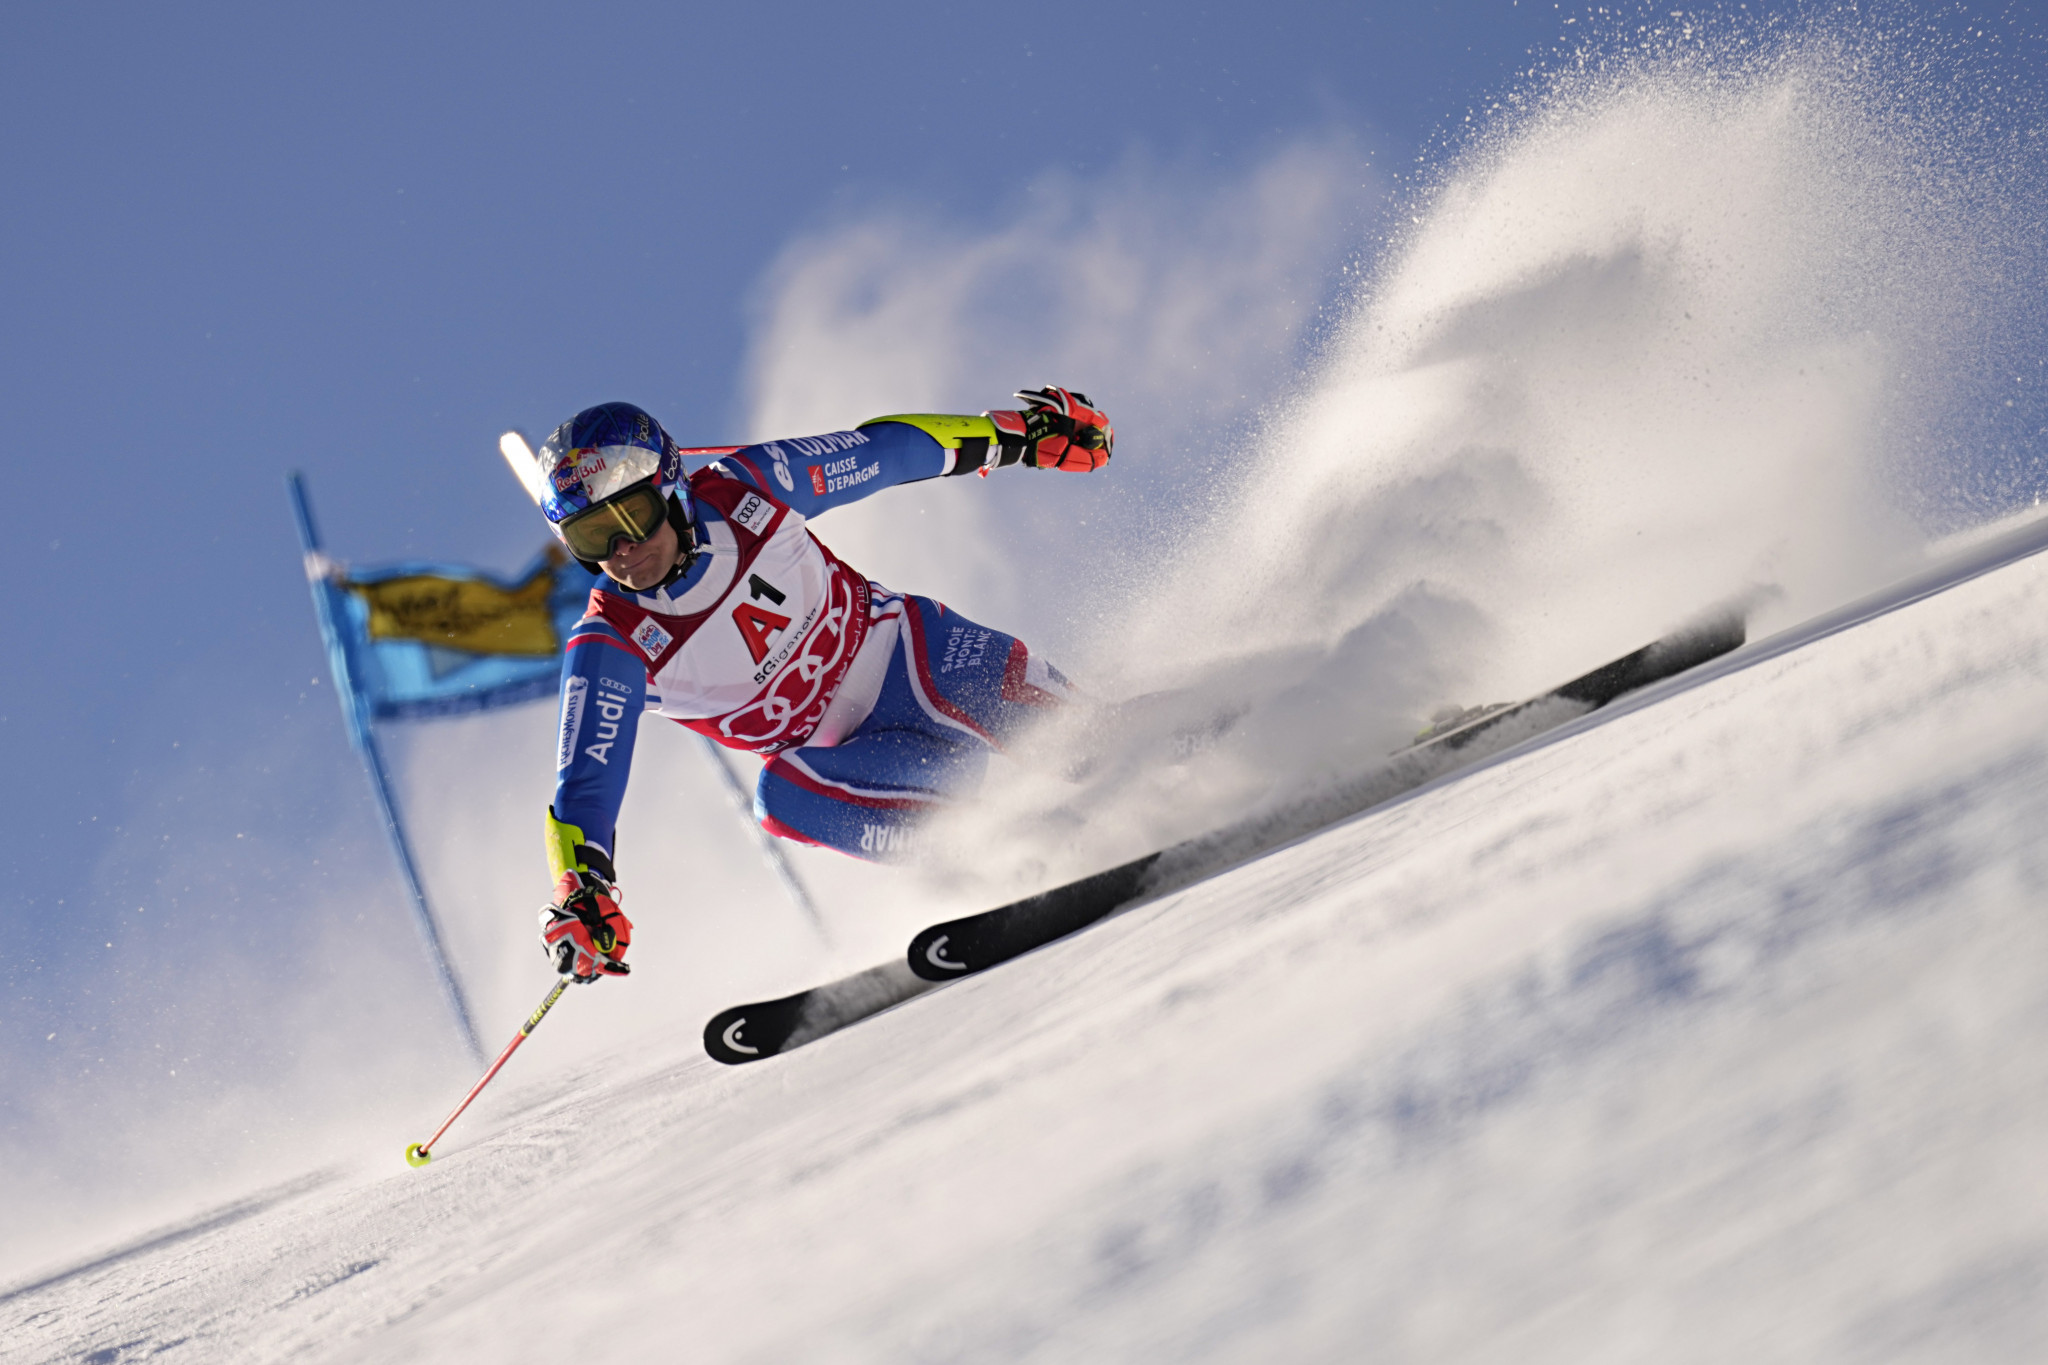 Pinturault looking to become second man to win twice at Lech-Zürs in FIS Alpine Ski World Cup 